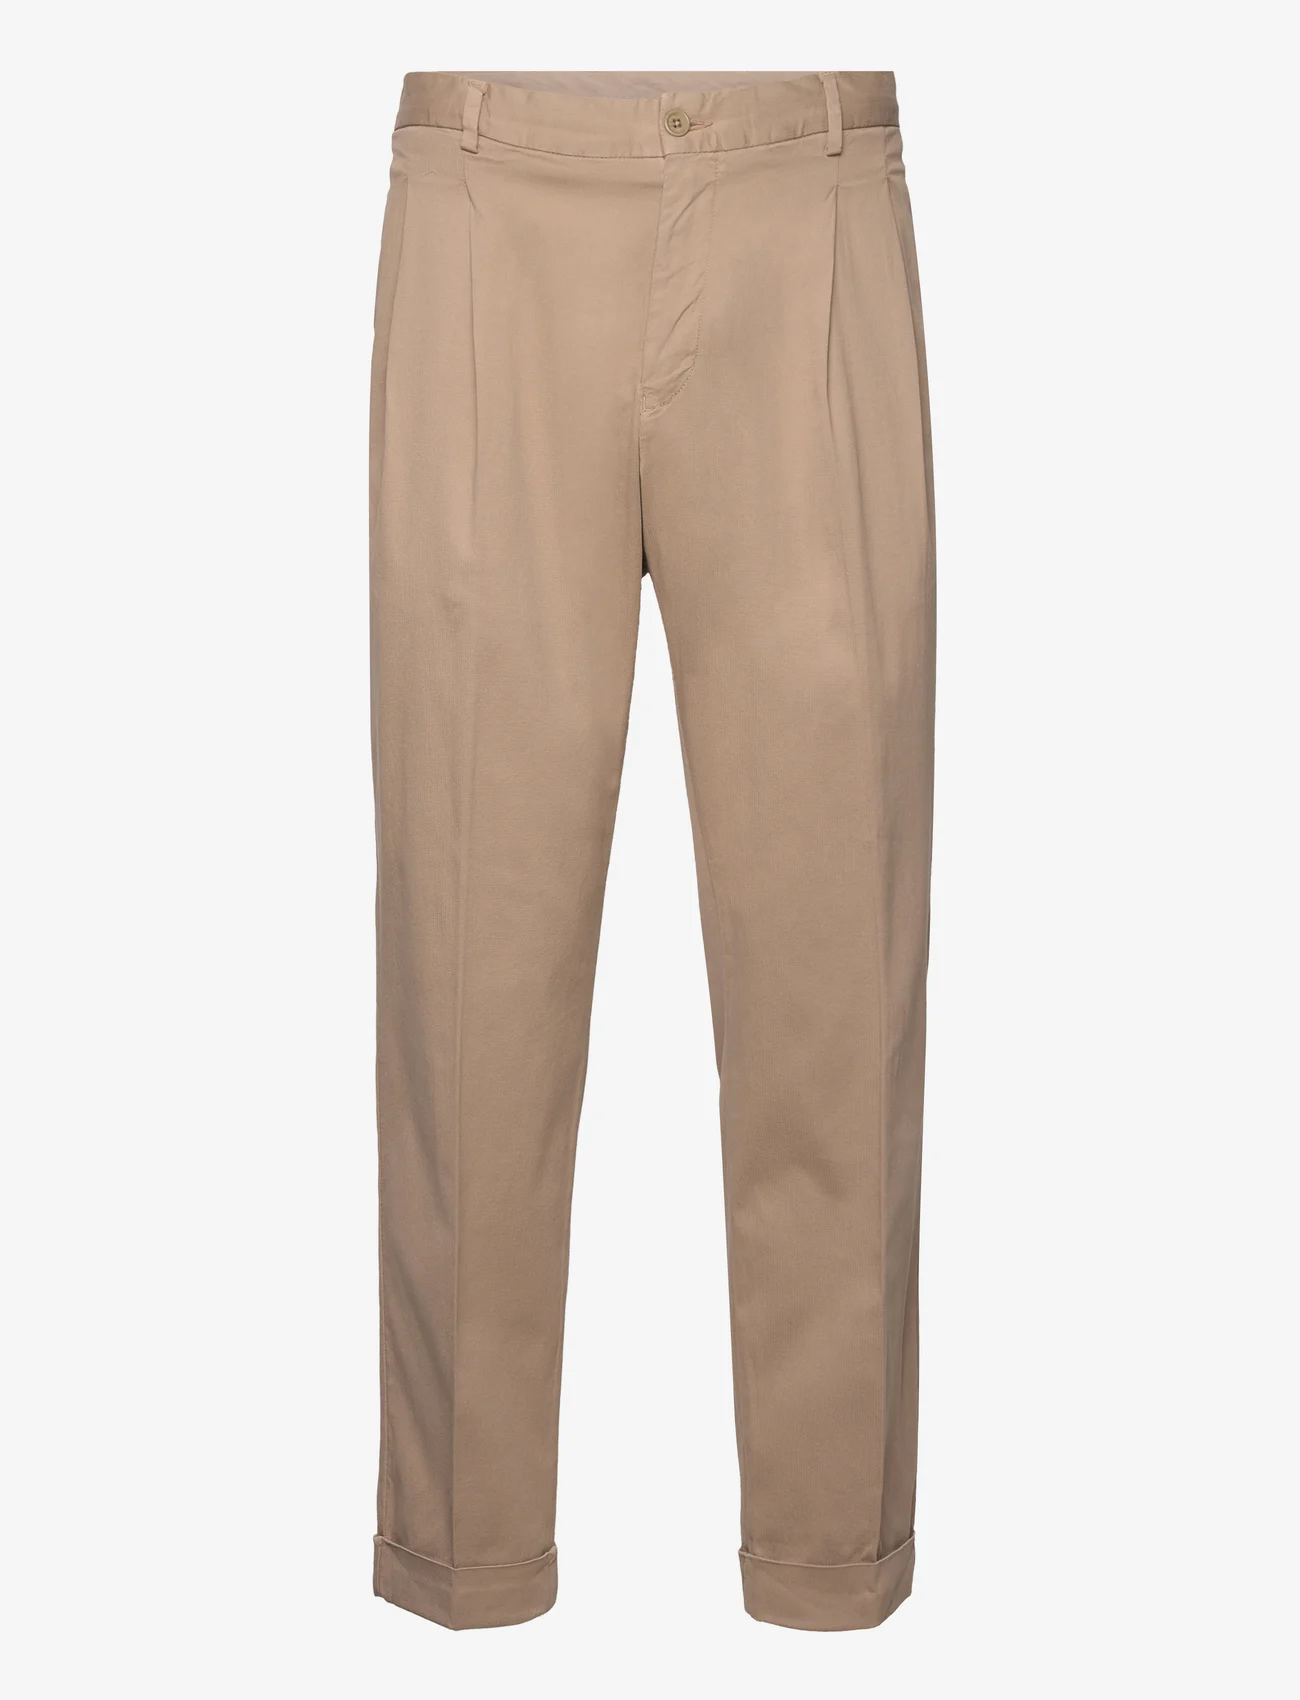 GANT - RELAXED TAPERED COTTON SUIT PANTS - chinos - taupe beige - 0